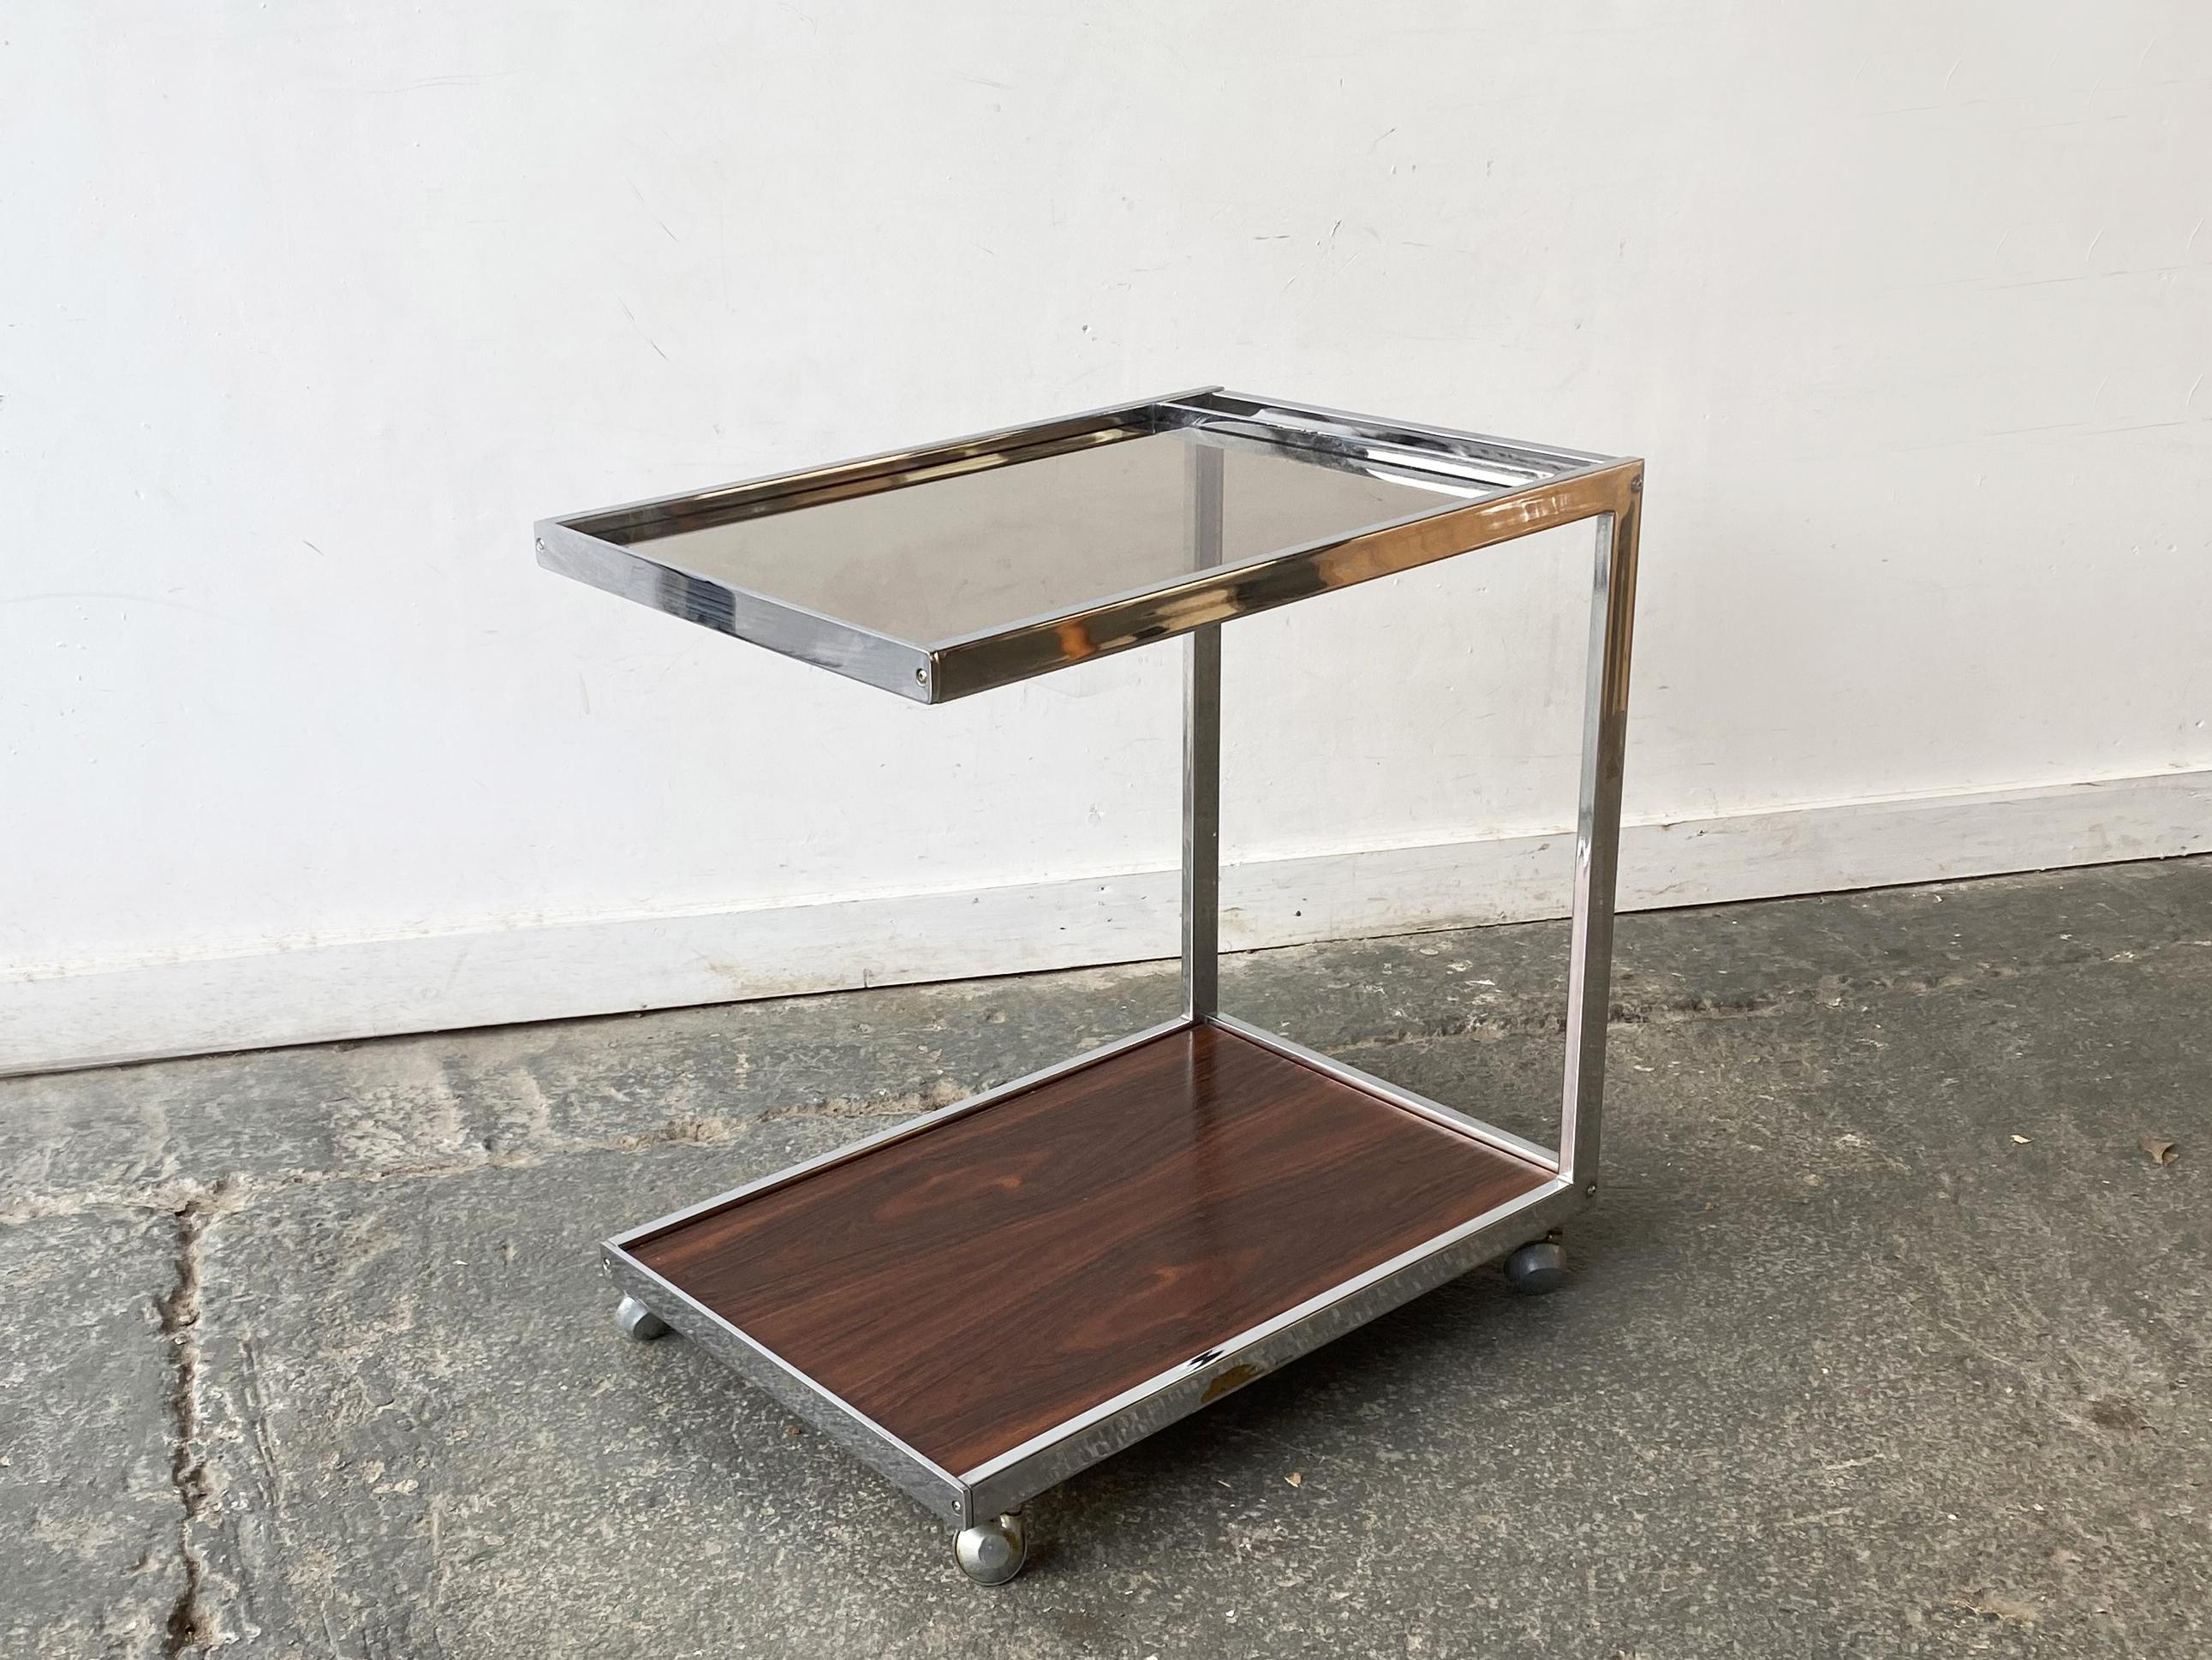 Made by British Manufacturer MDA (Miller Design Associates) and designed by Howard Miller. MDA produced designs in a similar style as an other well respected design company; Merrow Associates.

Very unusual to find an ‘open ended’ drinks trolley by